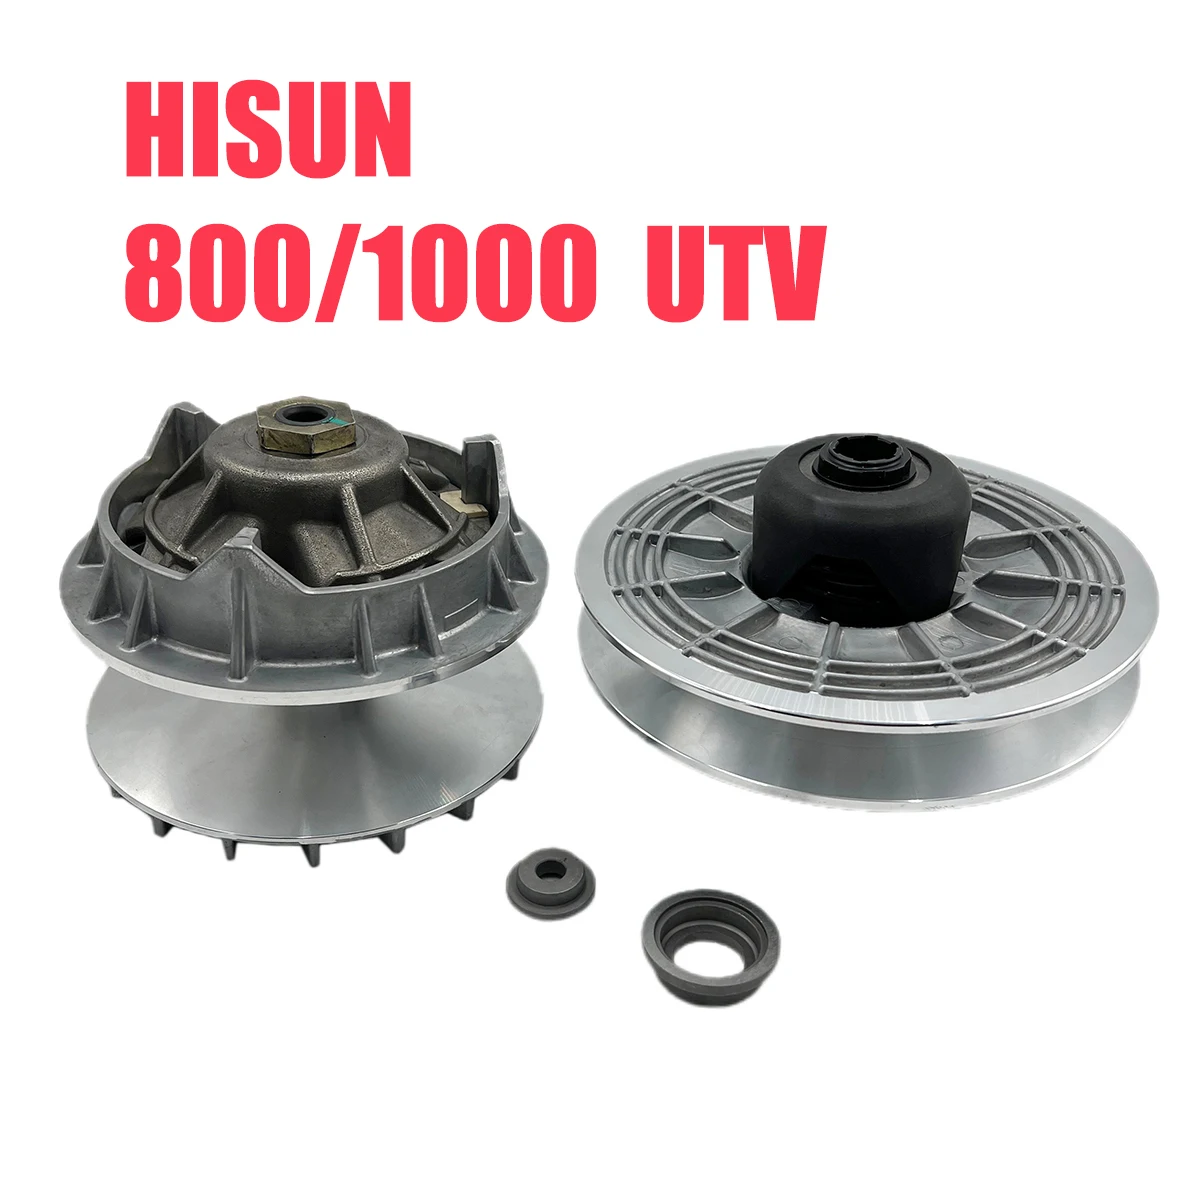 

New Upgrated Version CVT Primary Clutch Secondary Clutch Drive and Driven Pulley for Hisun 800cc 1000cc HS800 UTV 21300-F68-0000